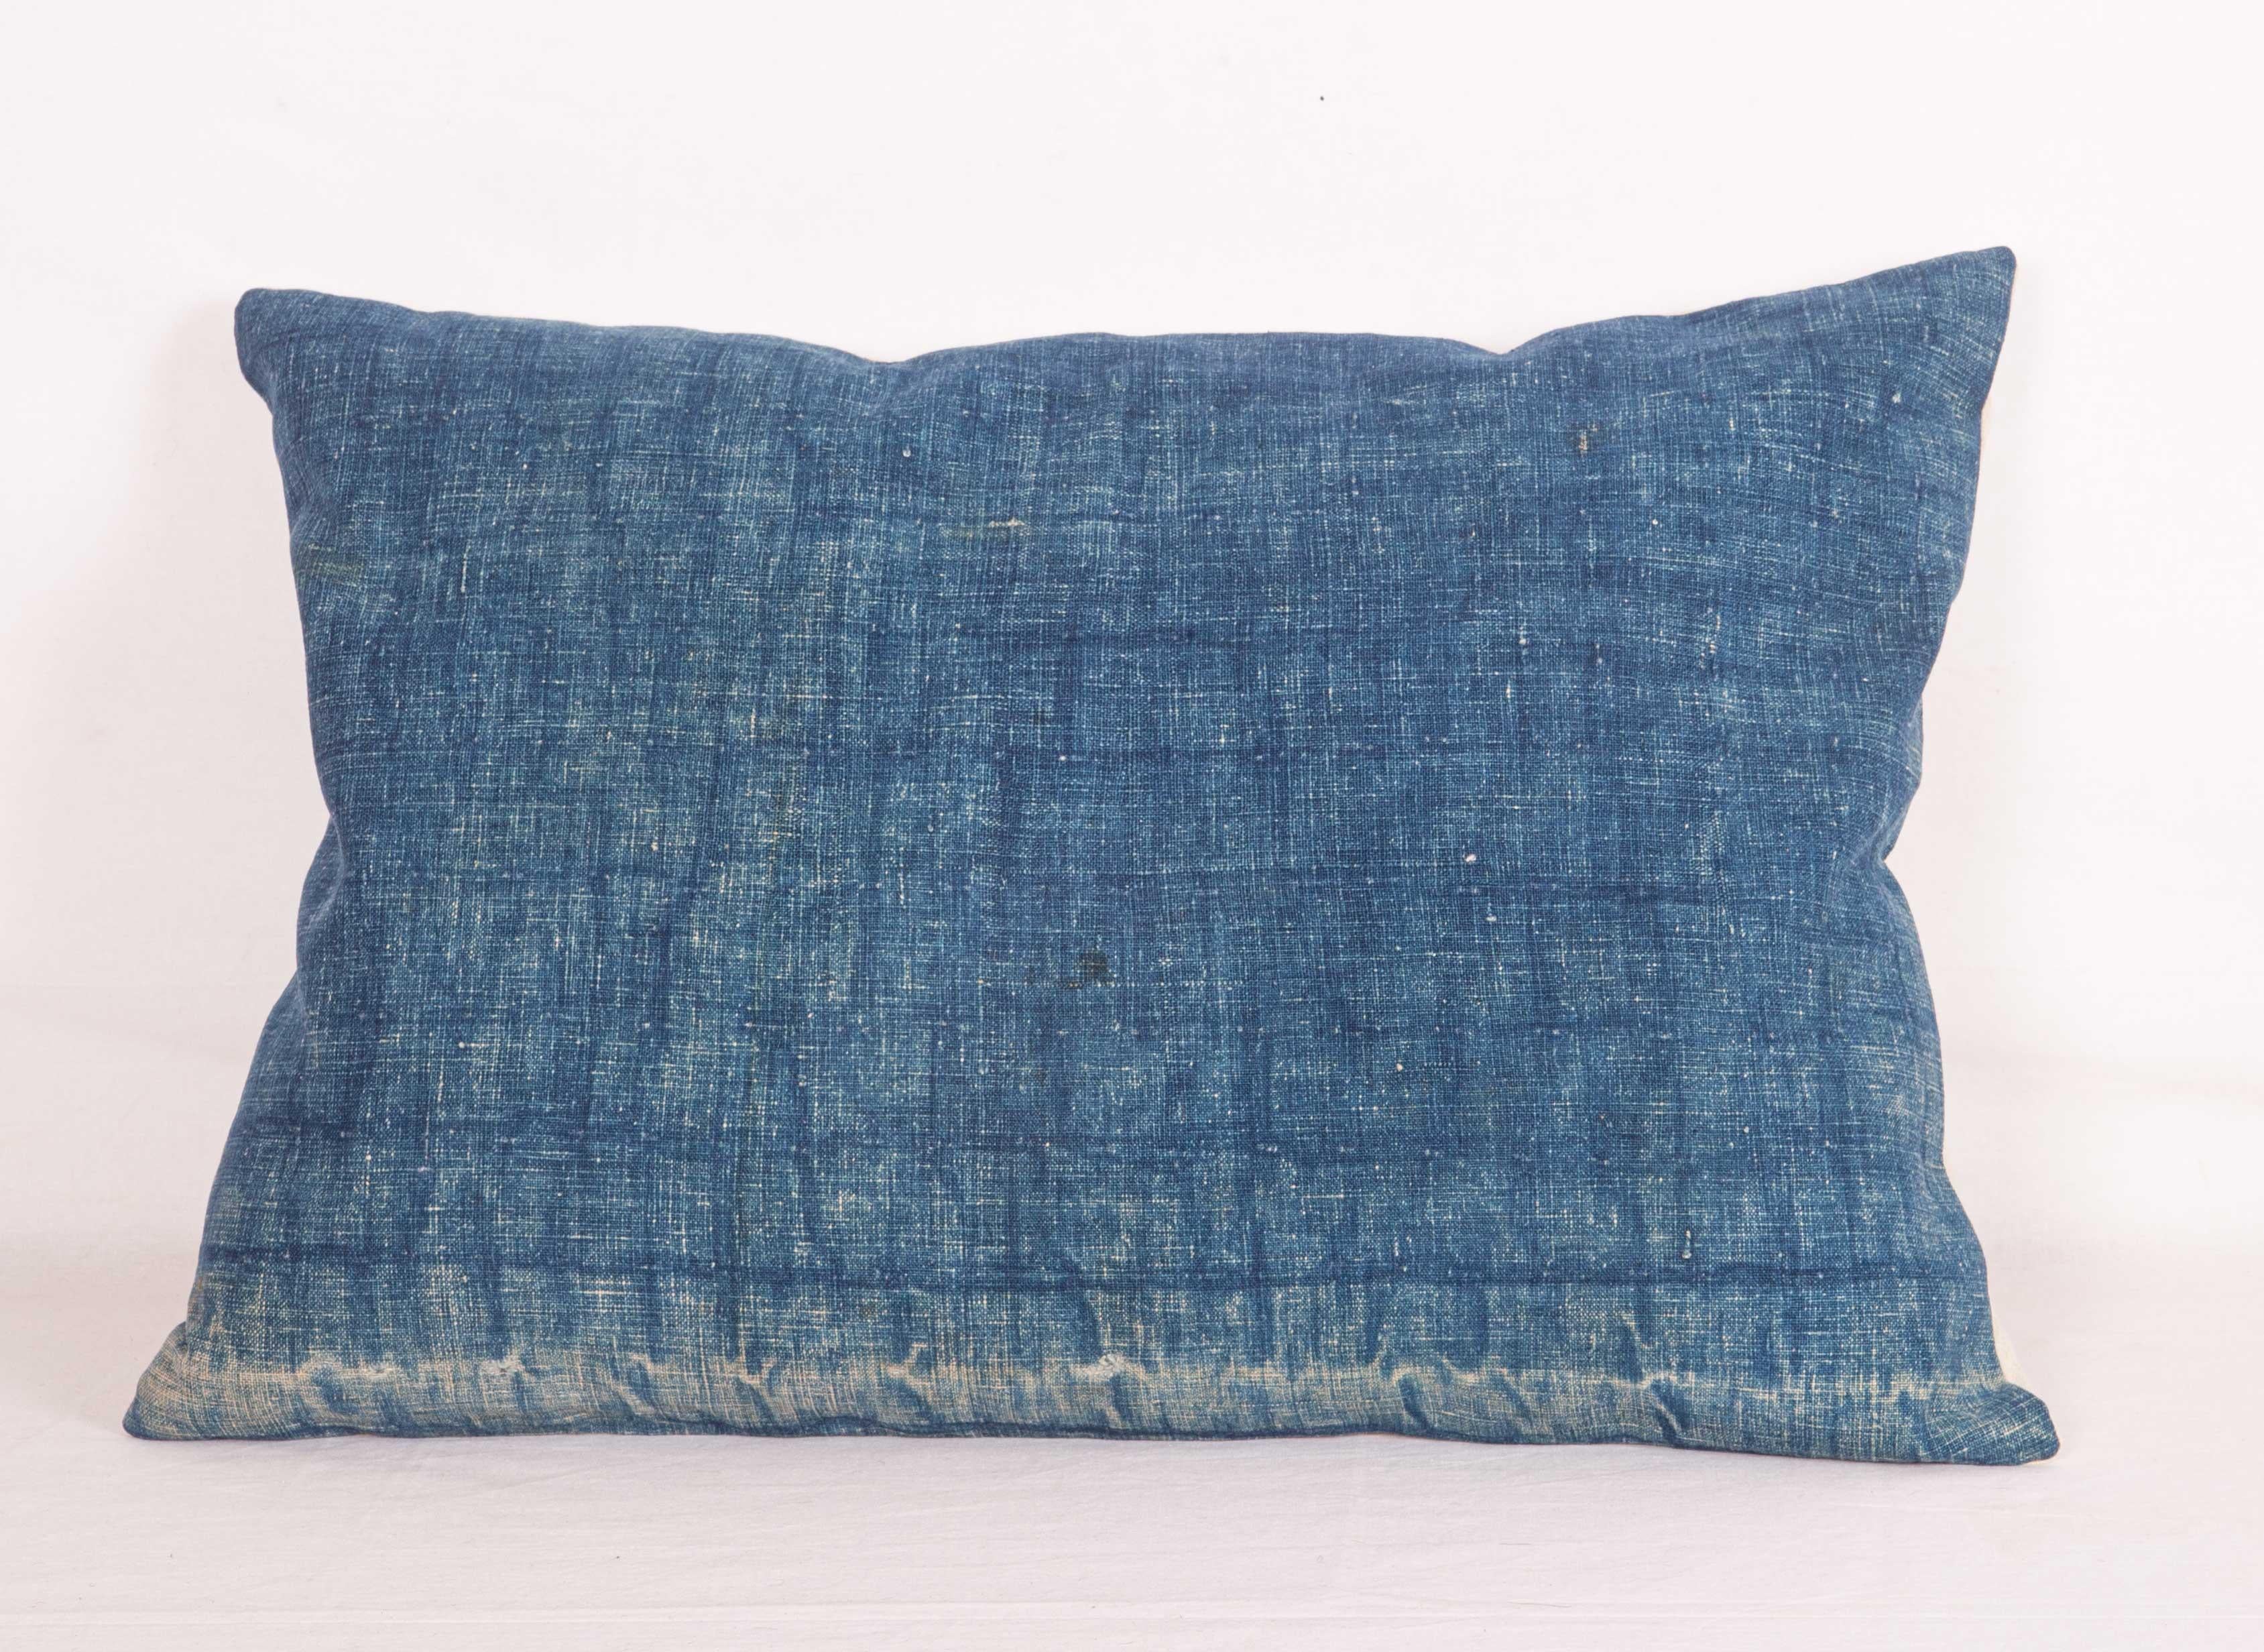 Hand-Woven Indigo Pillow Cases Fashioned from an Early 20th Century Anatılian Quilt Top